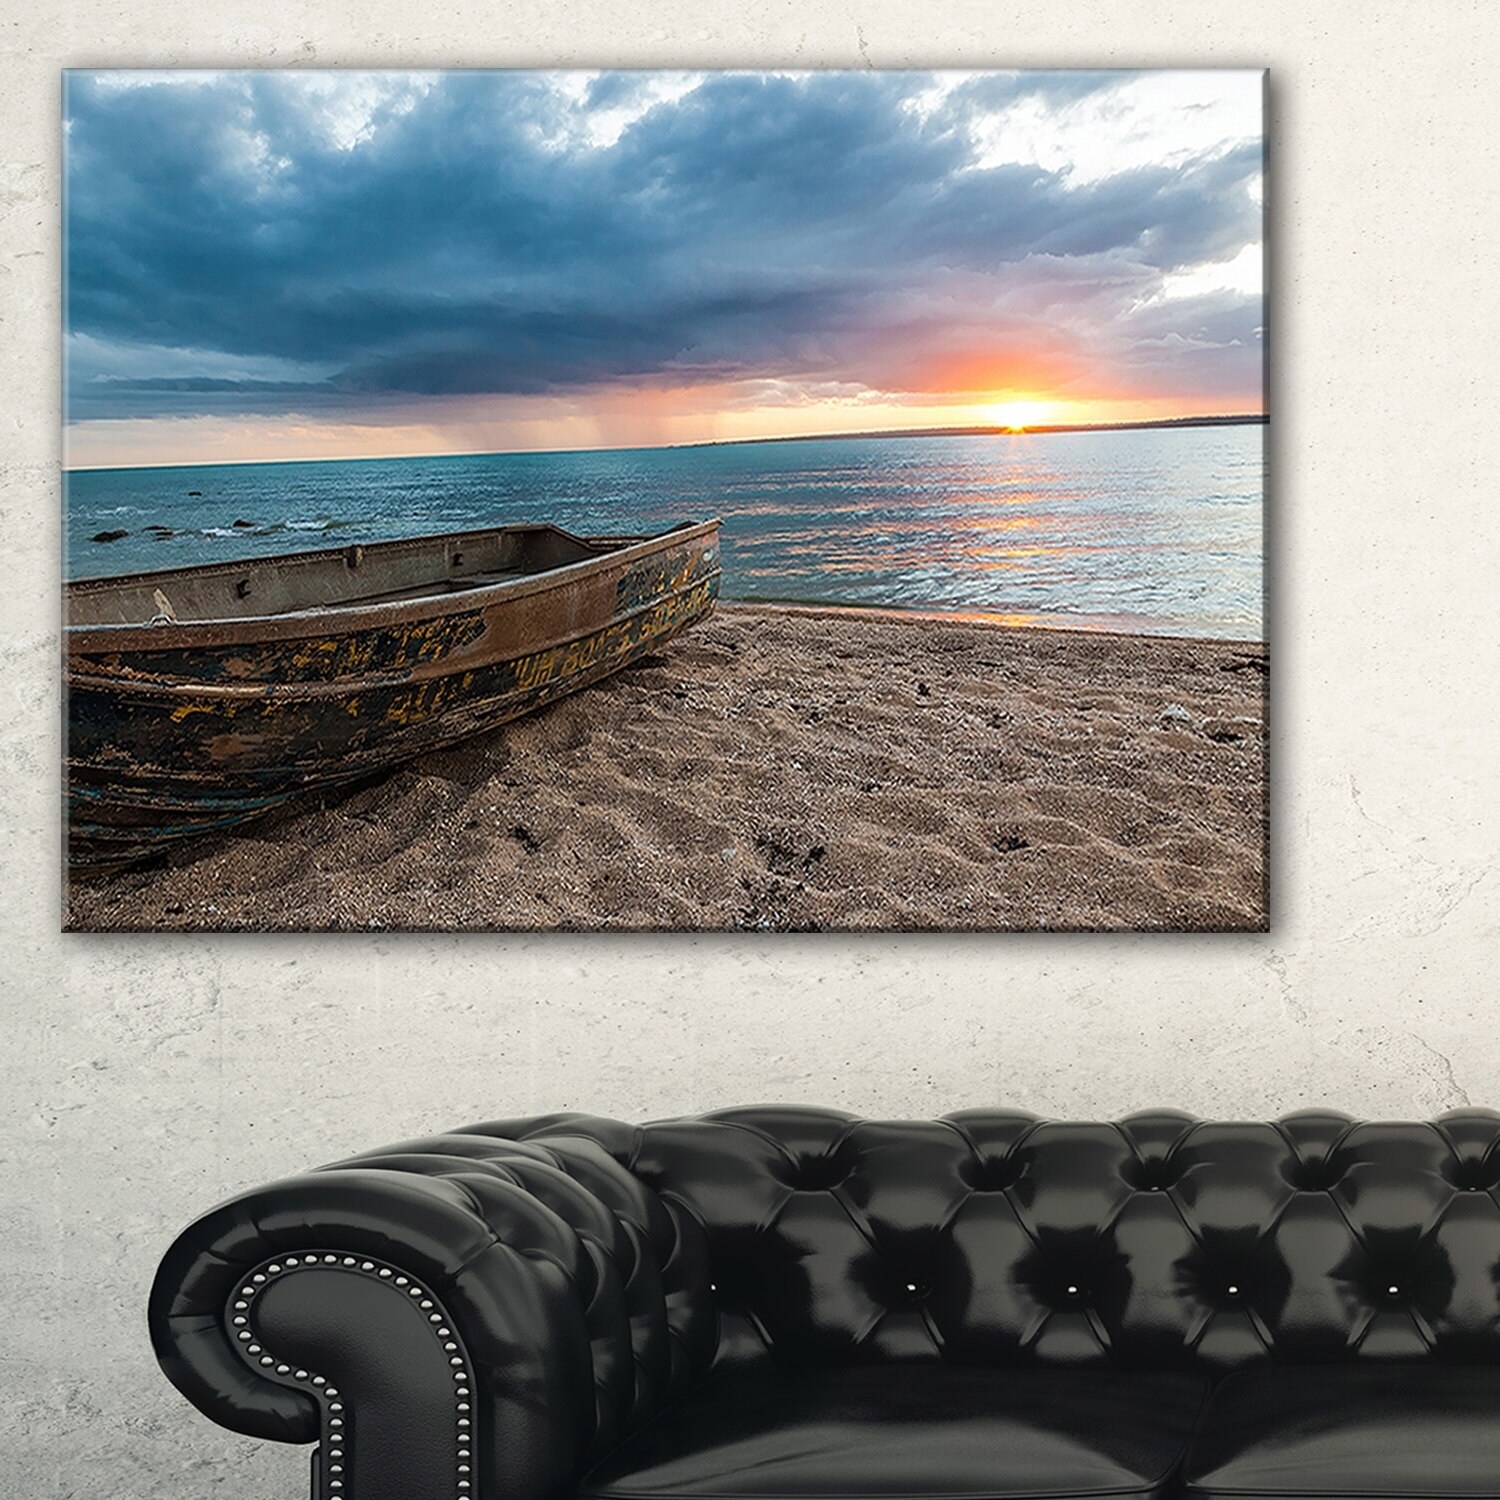 Designart 'Rusty Row Boat on Sand at Sunset' Seascape Large Disc Metal Wall Art